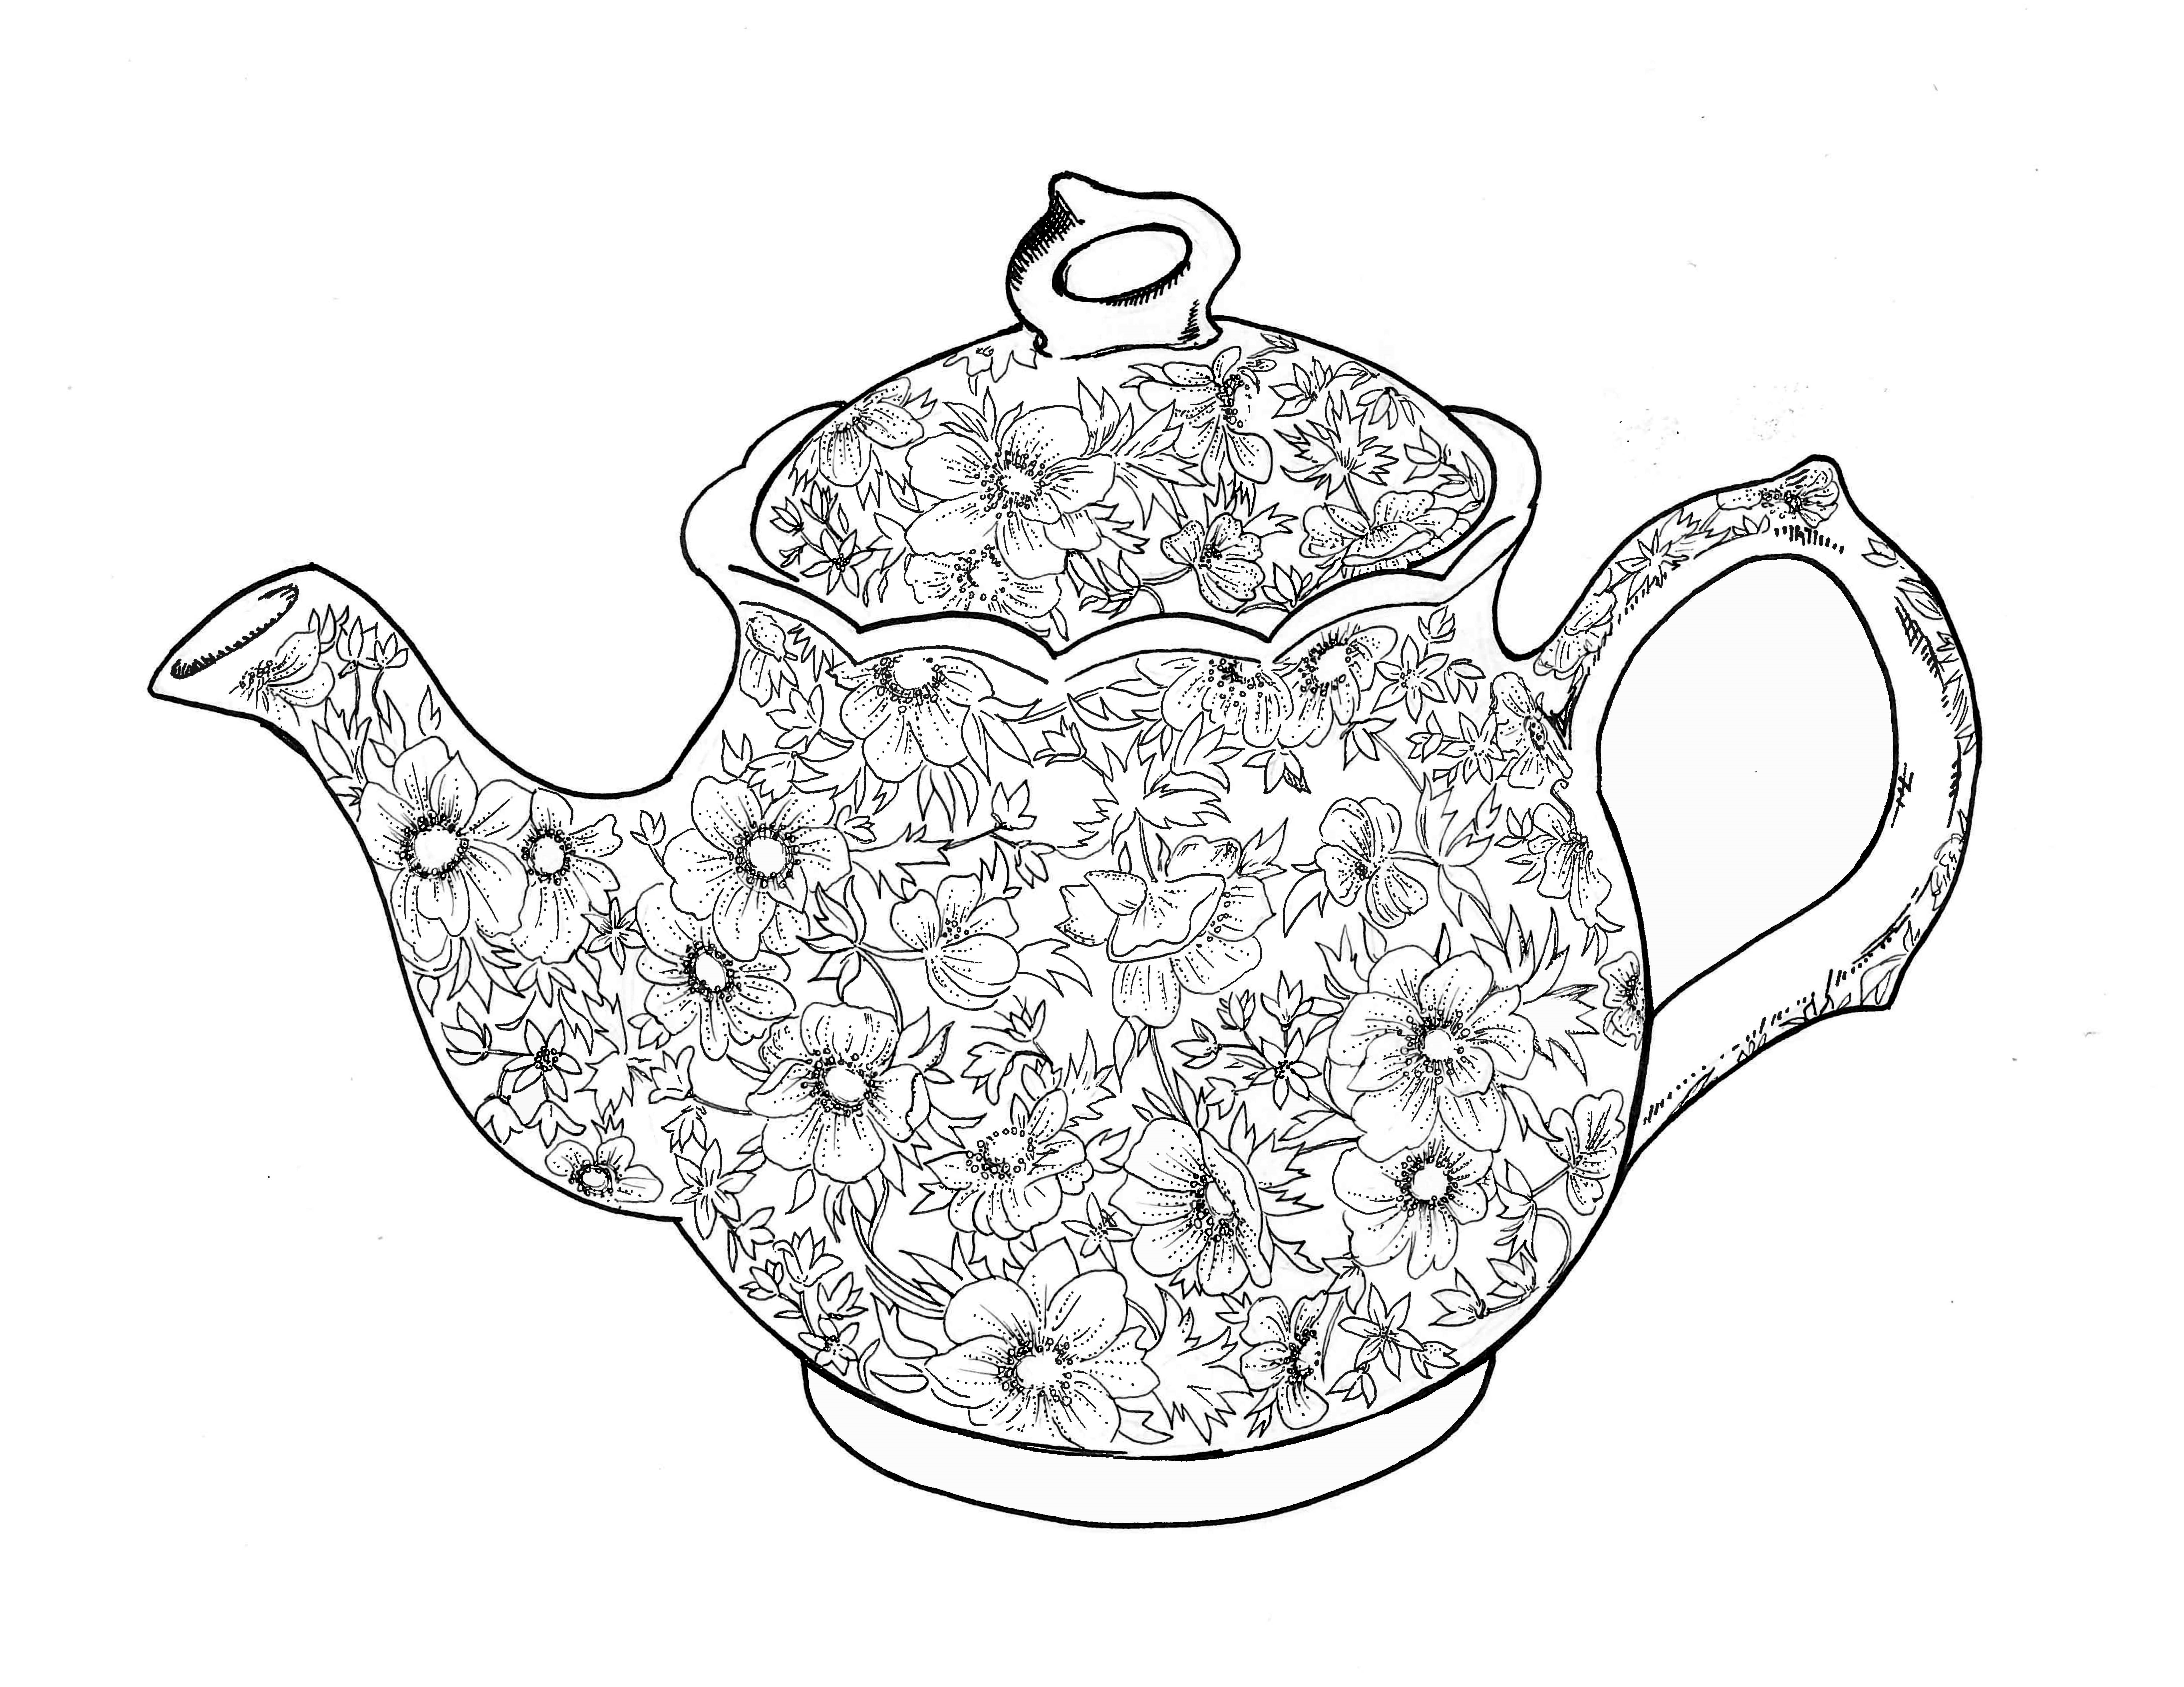 Teacup Coloring Pages To Print Free Teapot Coloring Book Download Free Clip Art Free Clip Art On